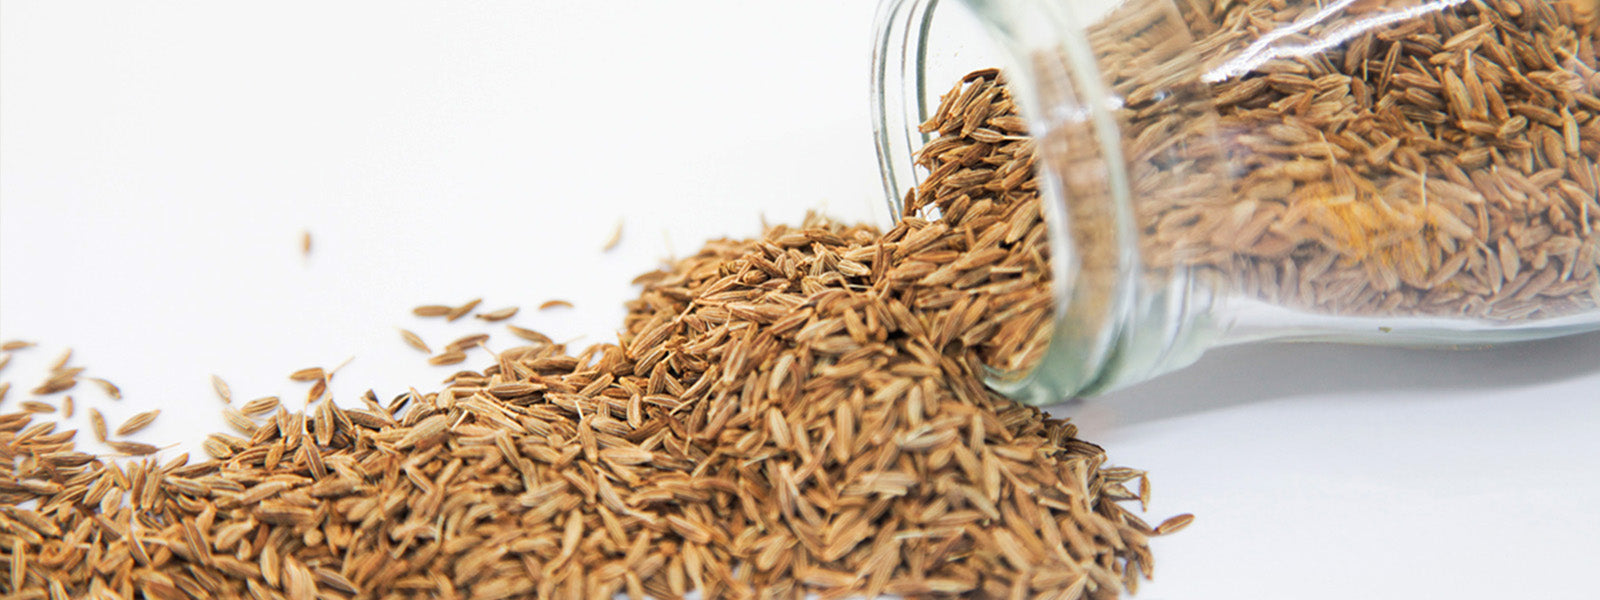 Cumin Seeds - Health Benefits, Uses and Important Facts